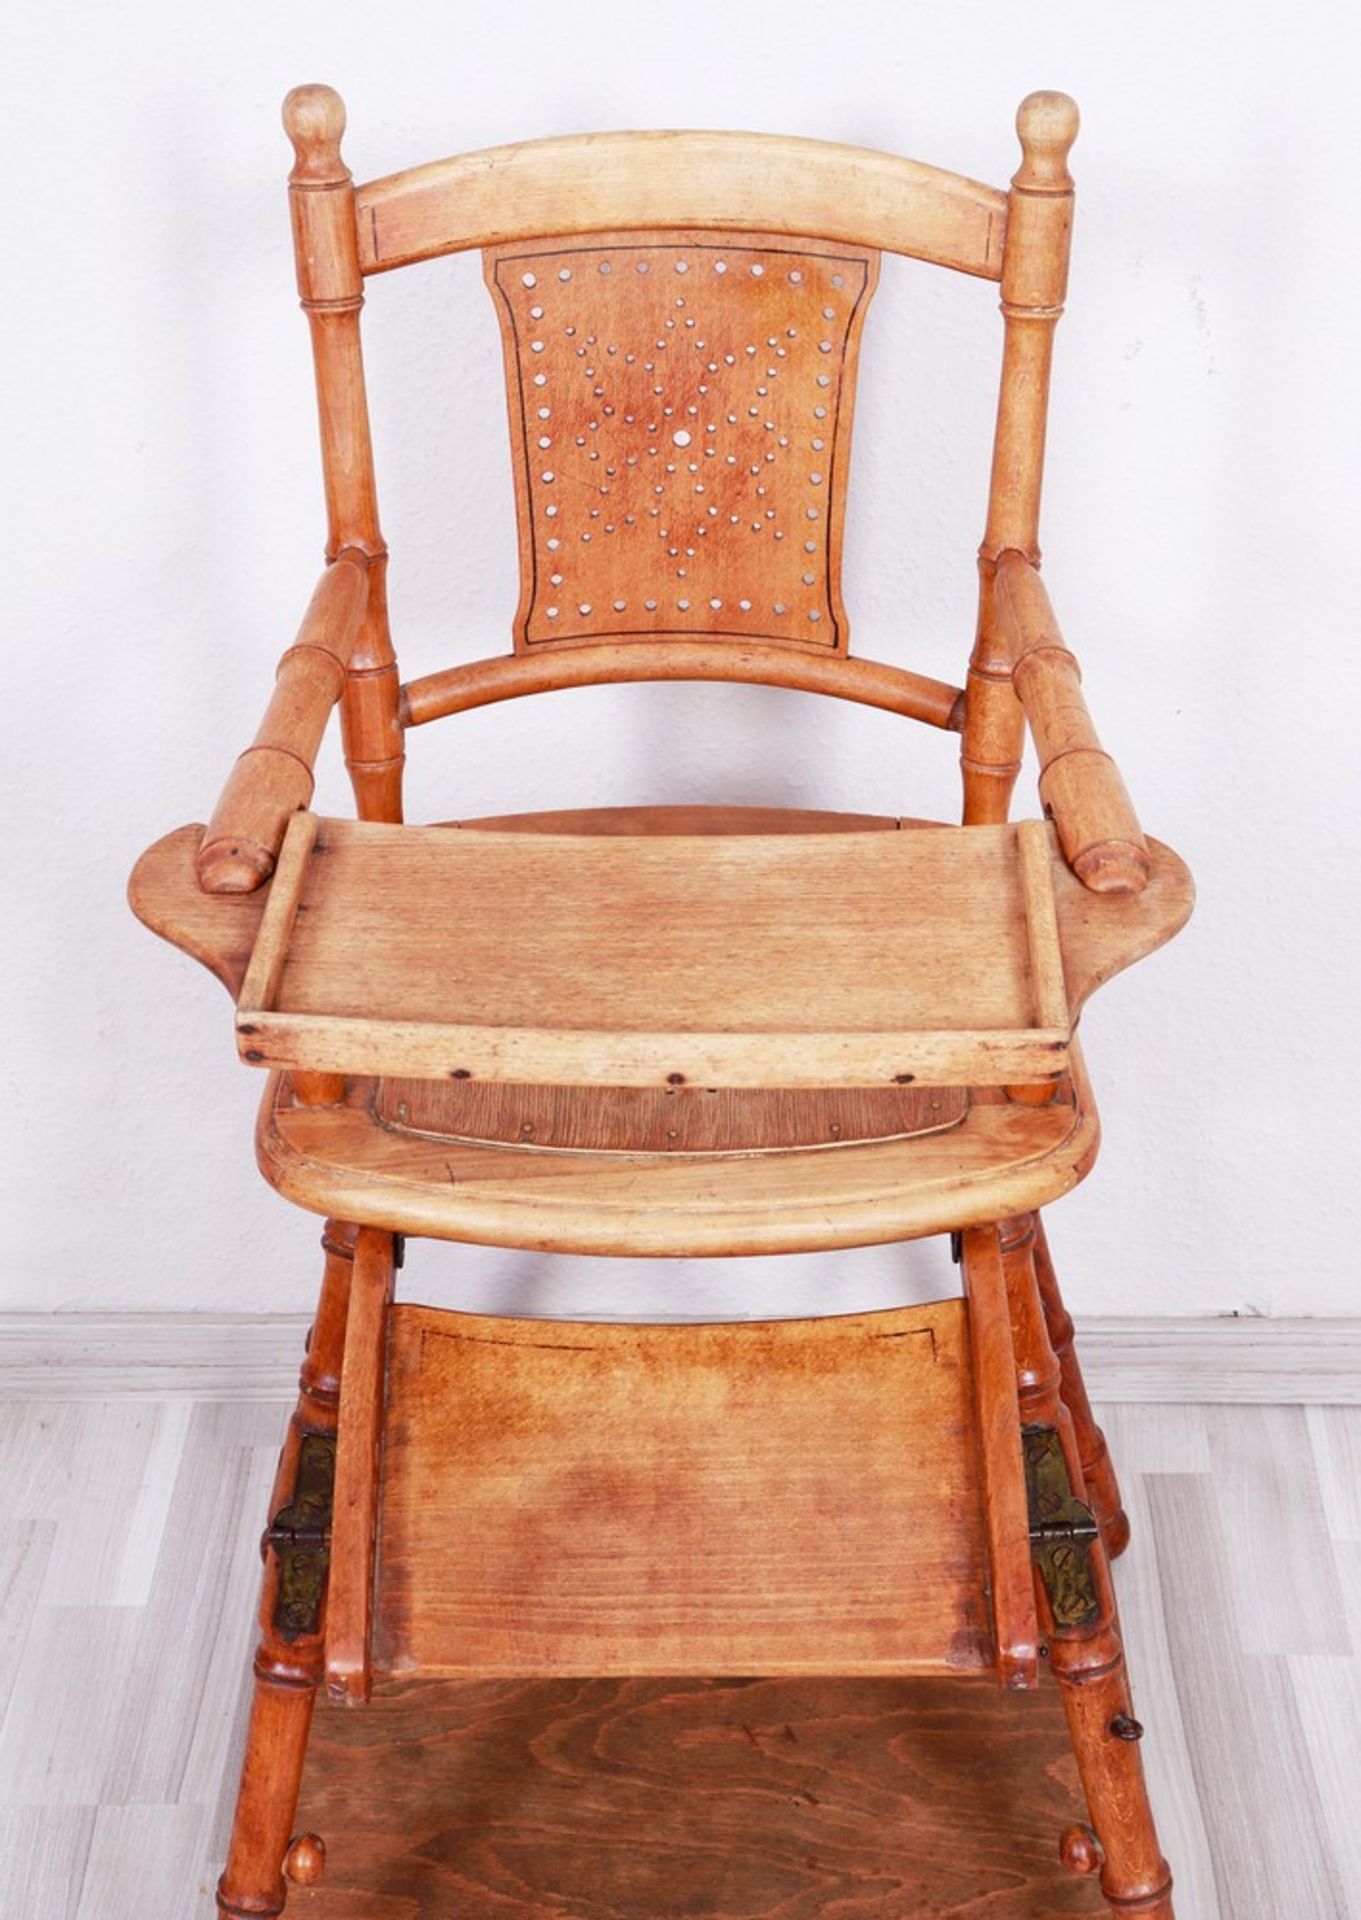 Convertible children's chair/high chair, German, c. 1920/30 - Image 3 of 4